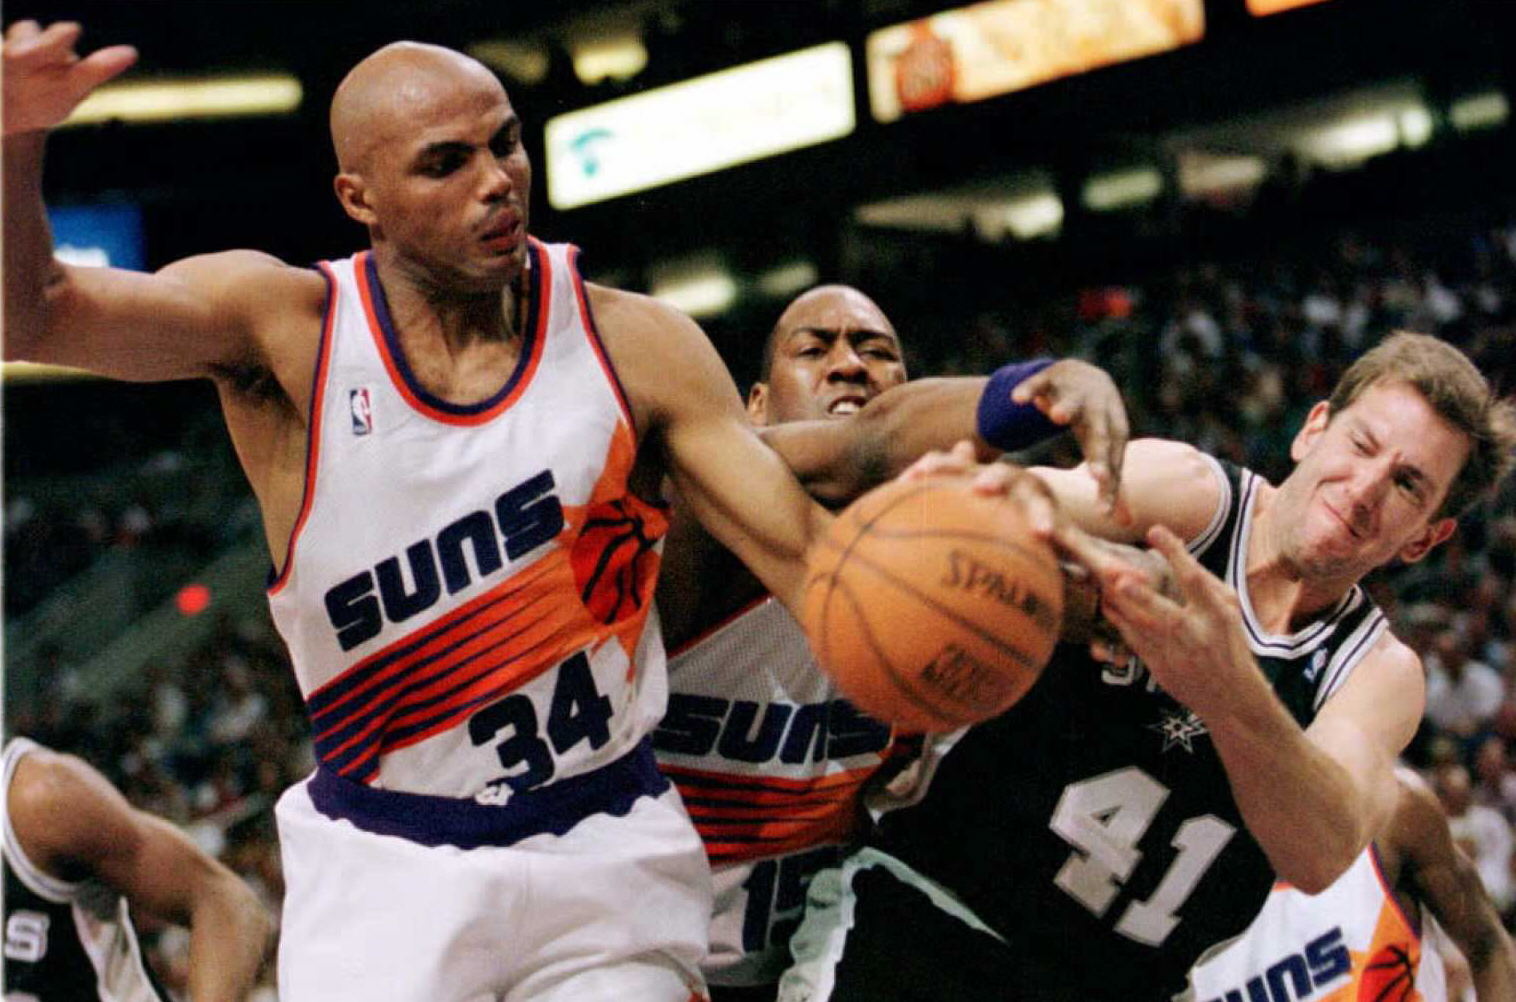 Charles Barkley tries to control the ball against an opposing team member.